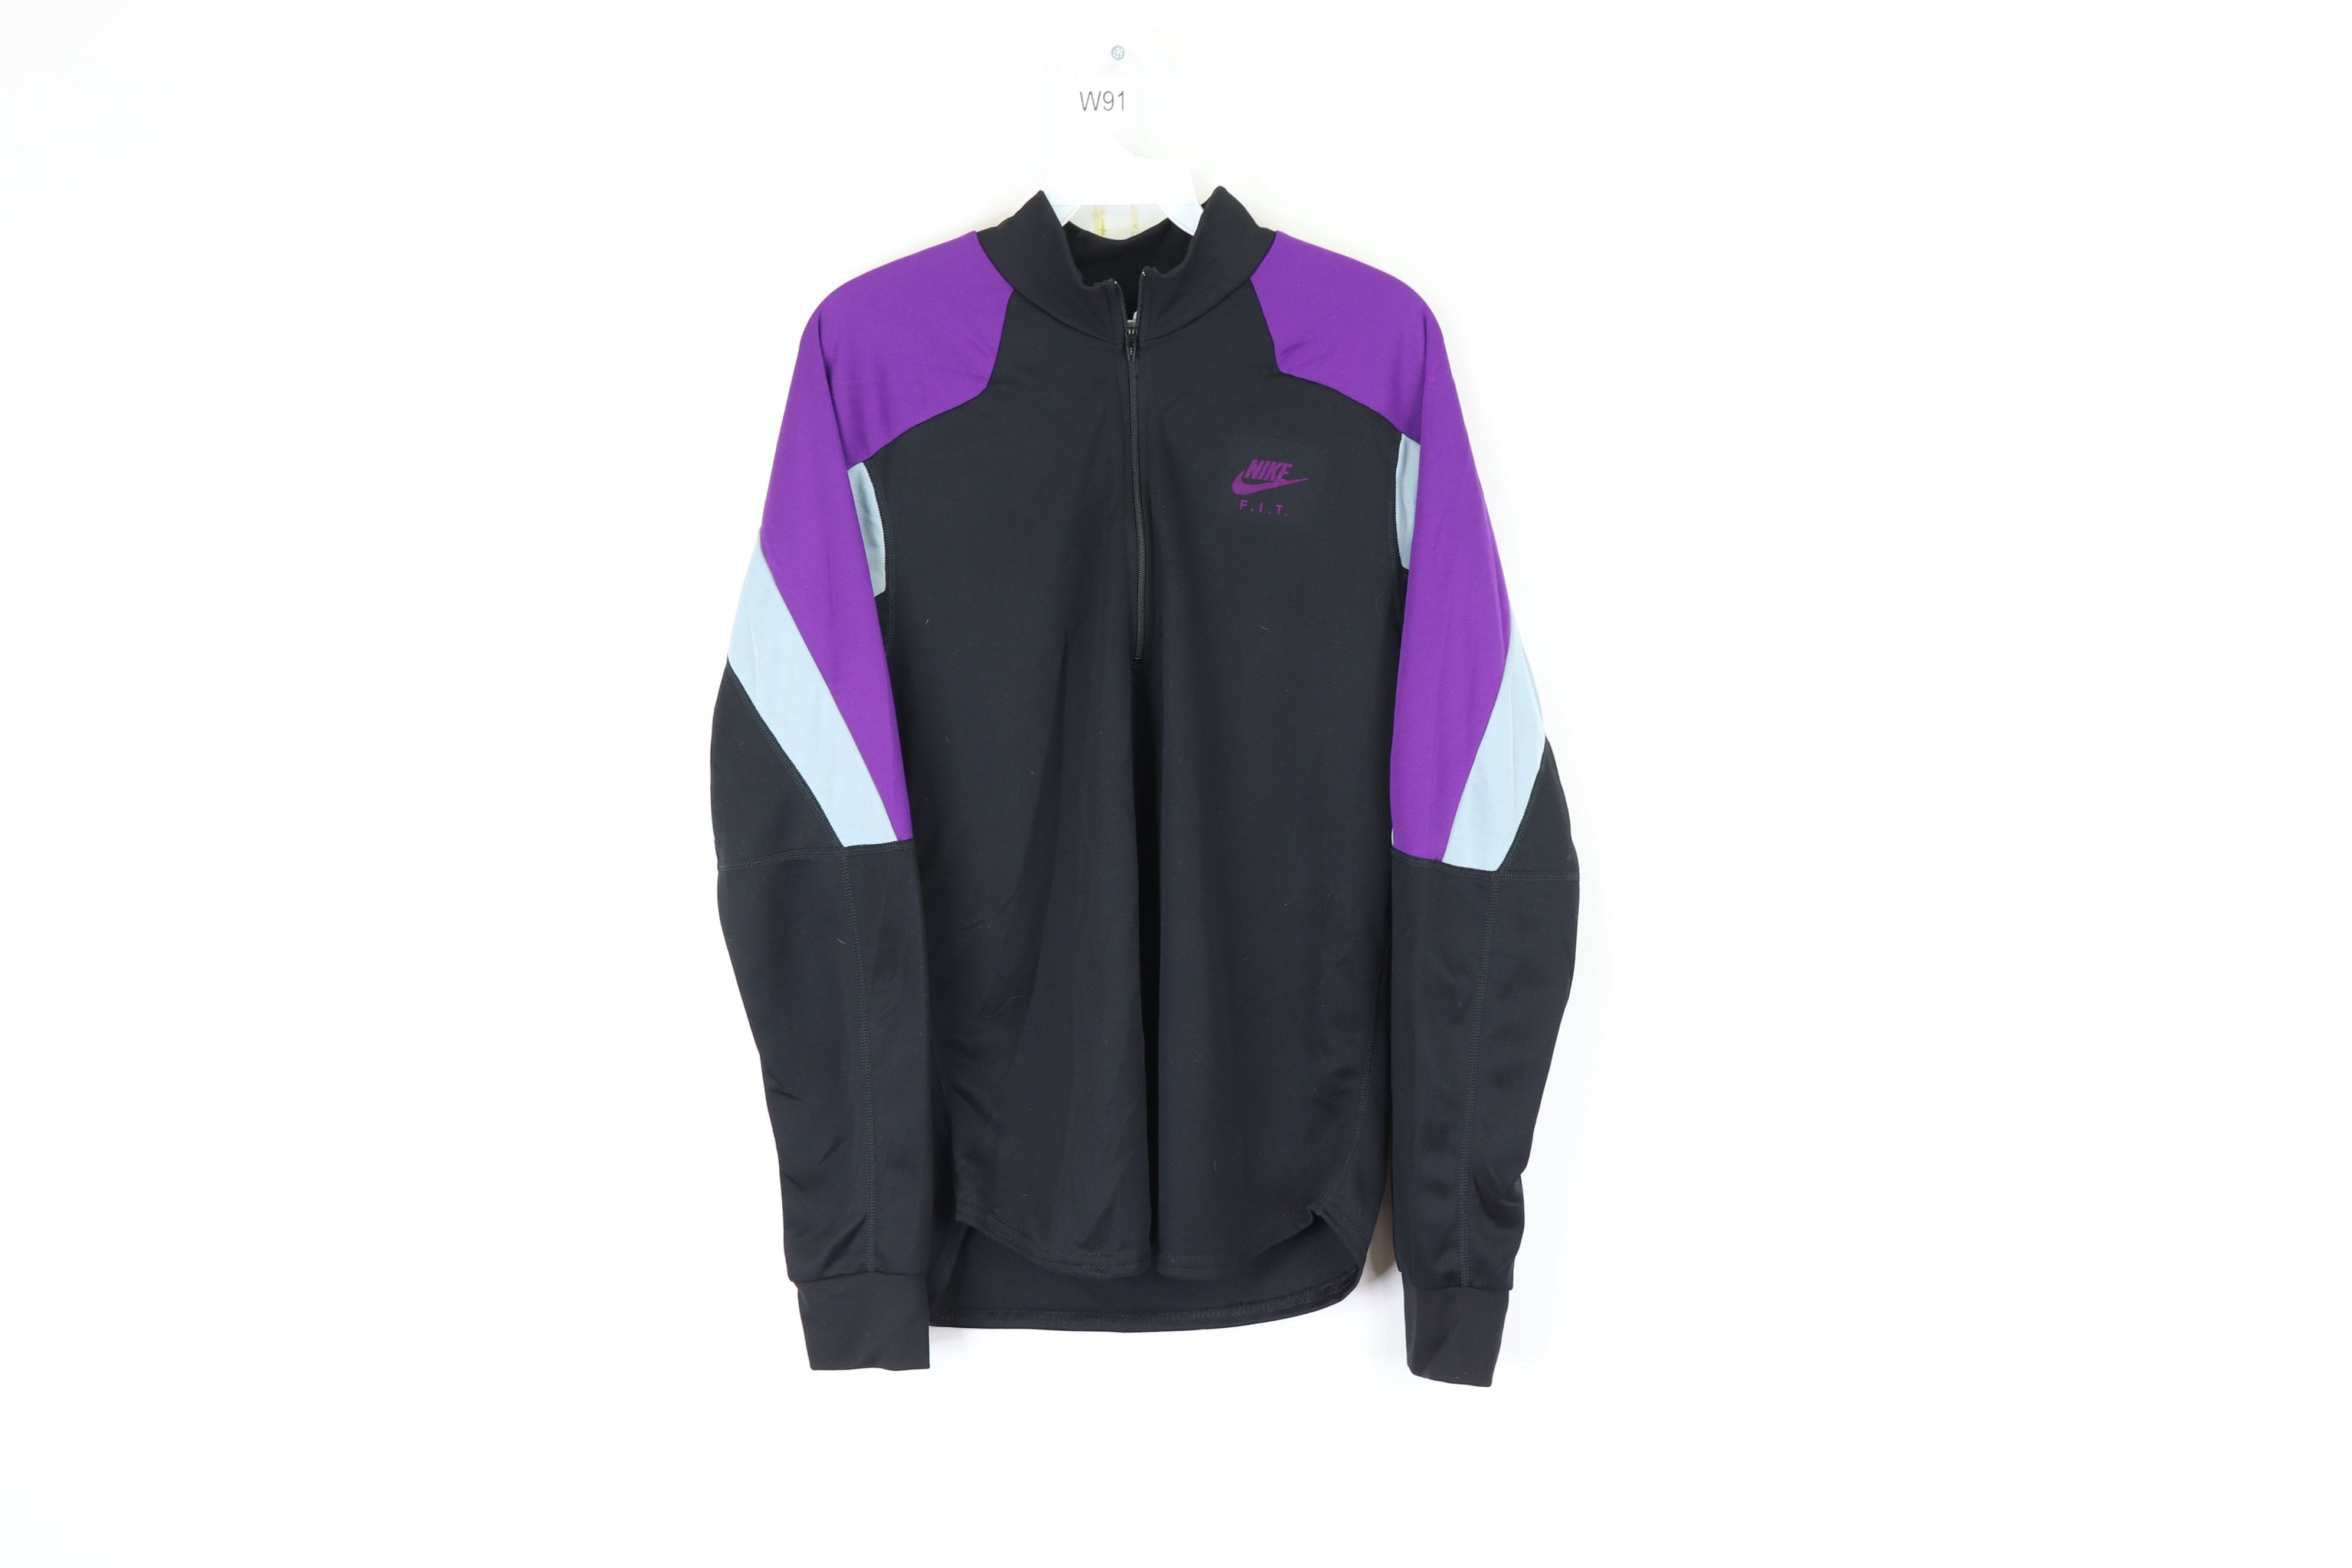 Nike Vintage 80s Nike International FIT Color Block Zip Sweater Size US S / EU 44-46 / 1 - 1 Preview